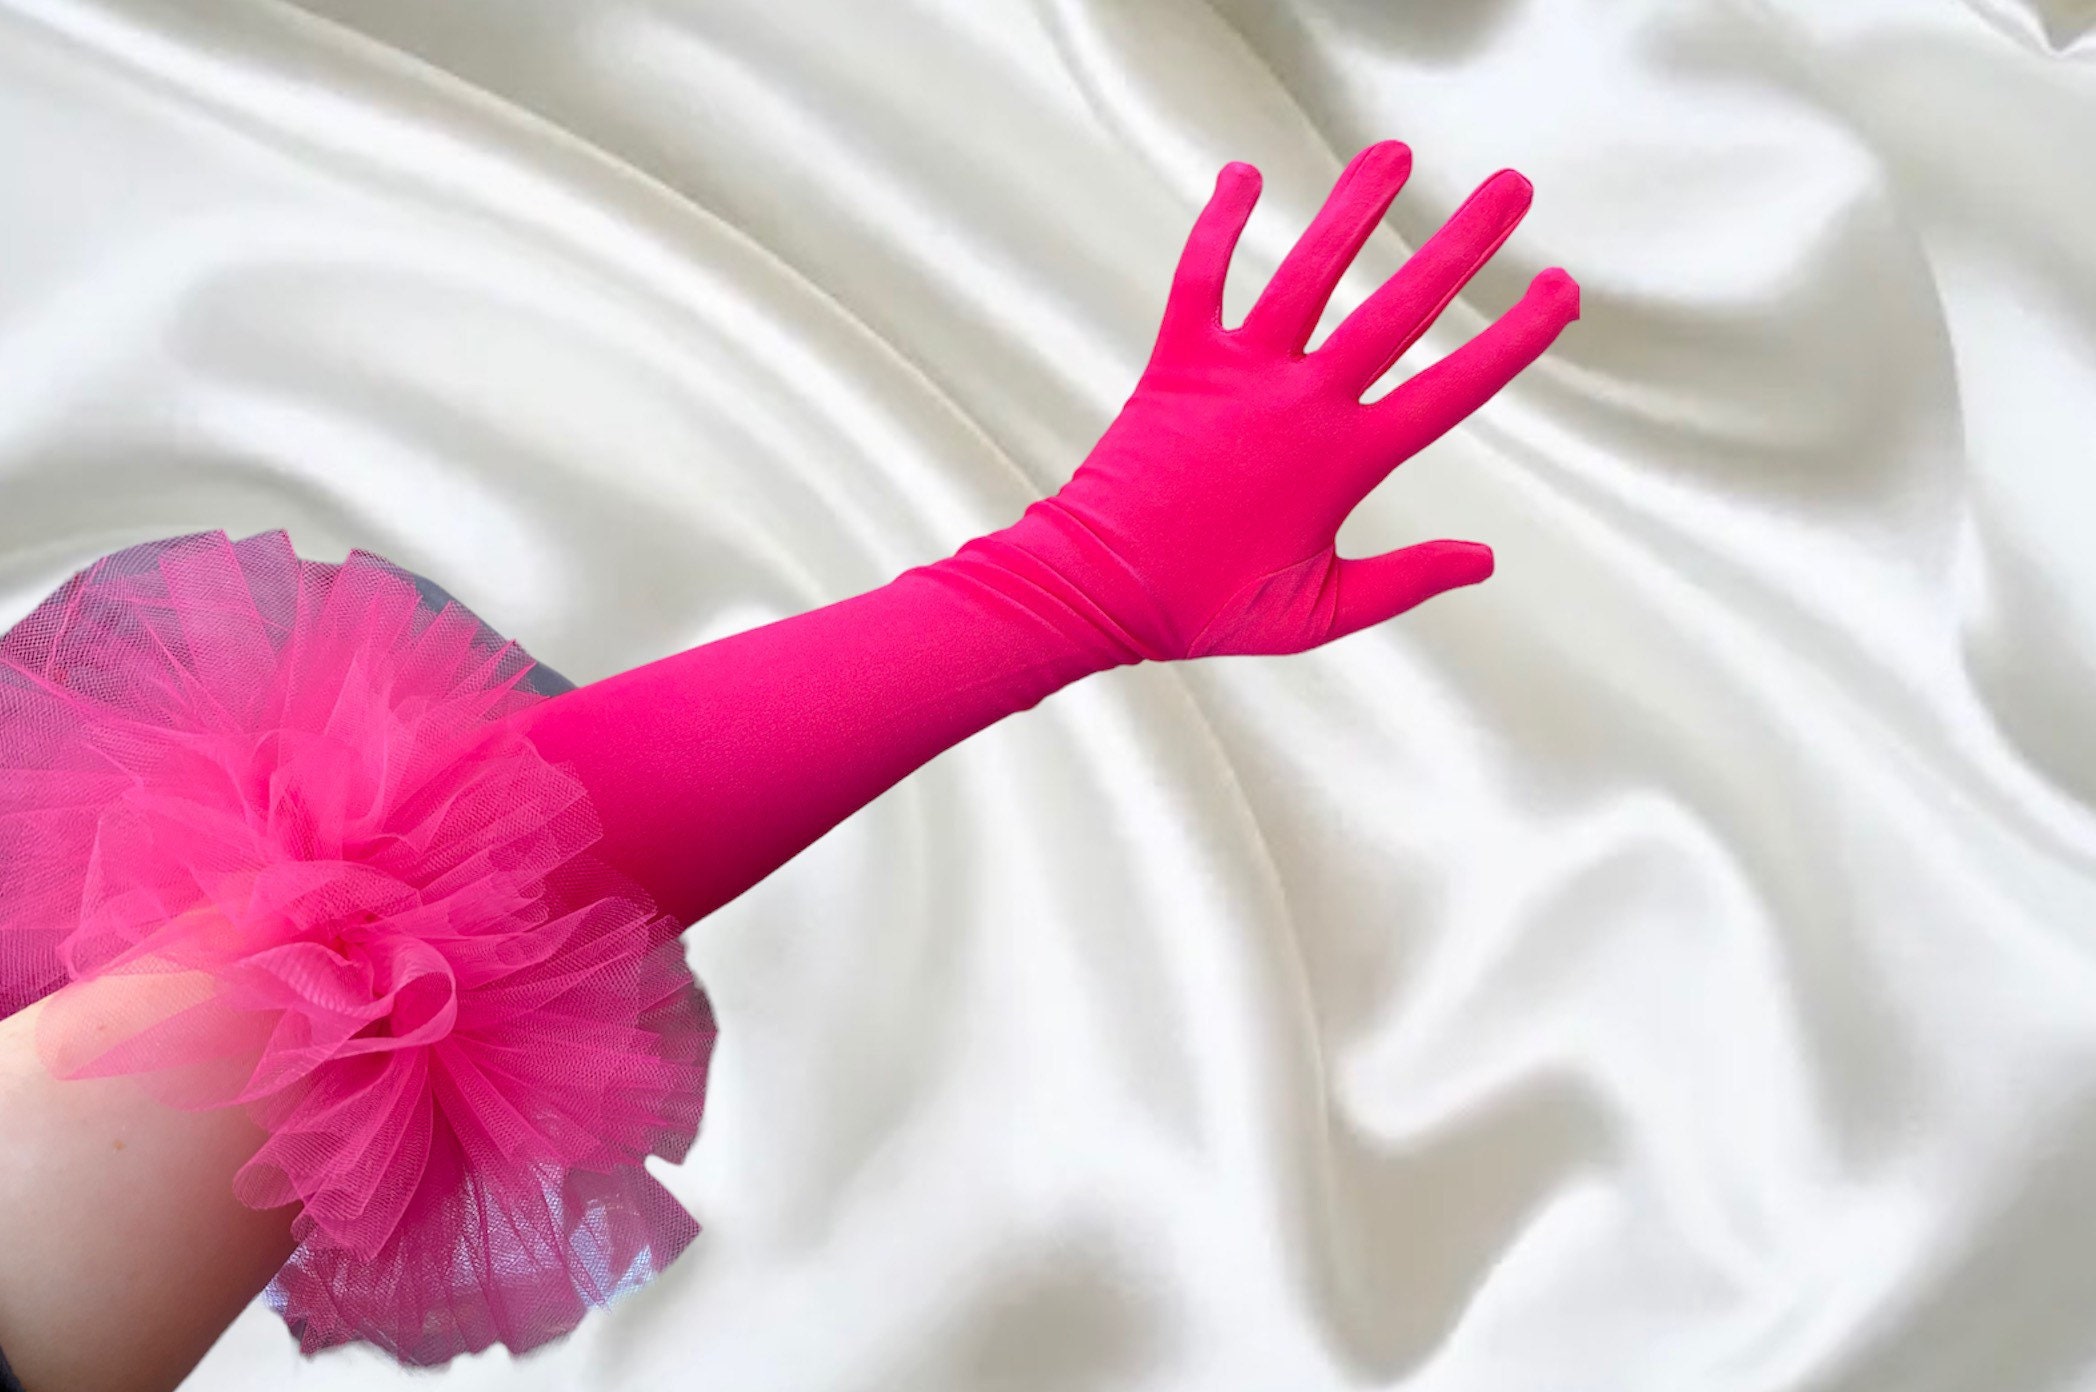 statement Ruffle Hot Pink Gloves Tutu Tulle On Soft Matte Glove, Over The Elbow Opera Length Performance Dance Event Puff Pom